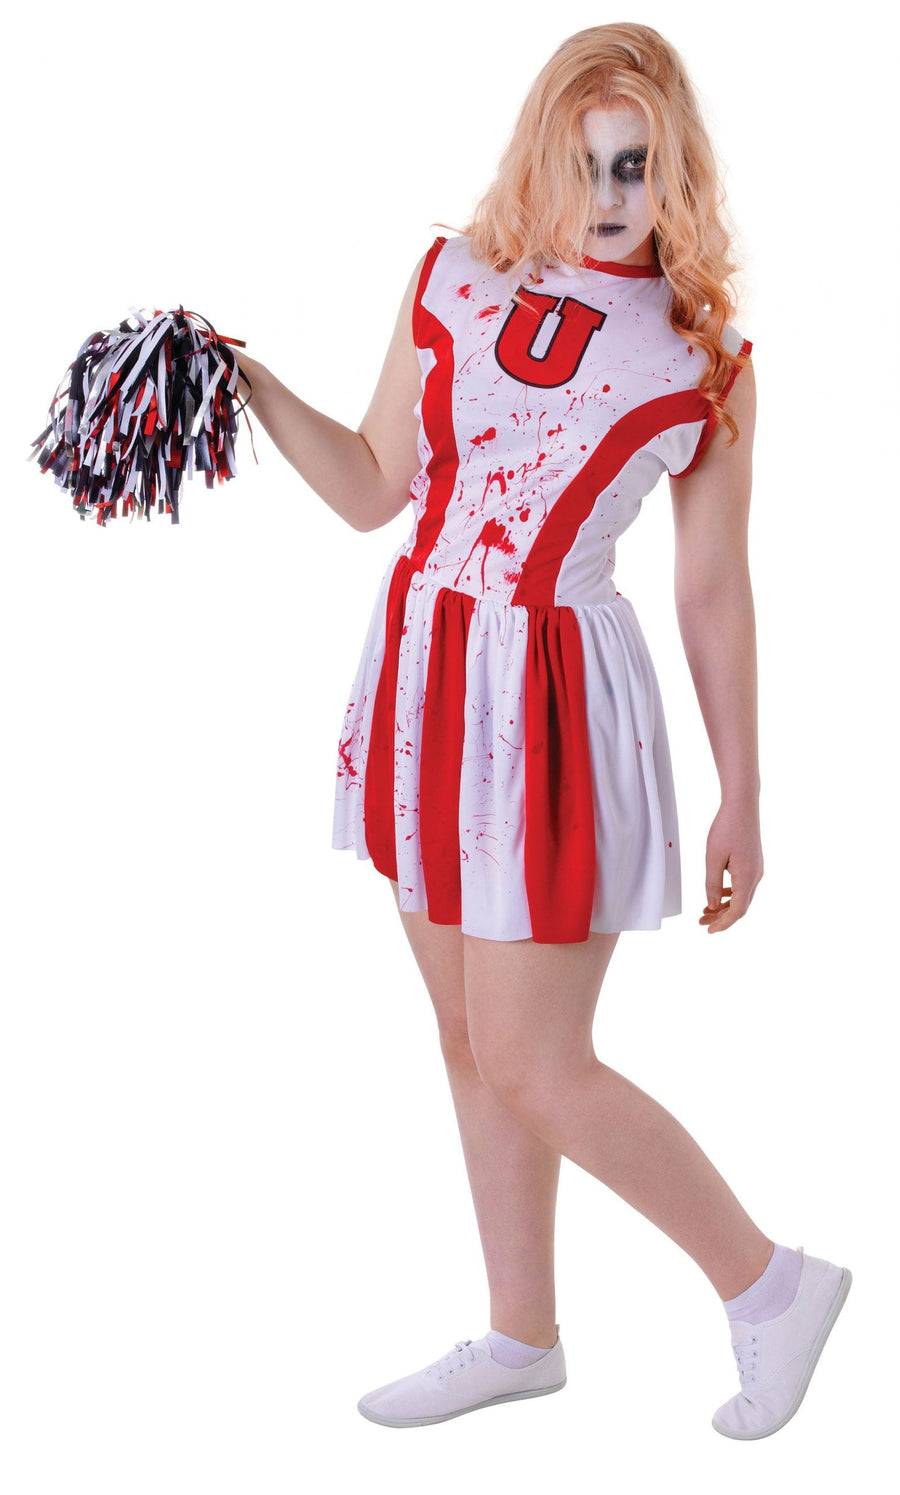 Cheerleader Bloody With Pom Teen Costume Female Uk Size 6 10 28" 30" Chest_1